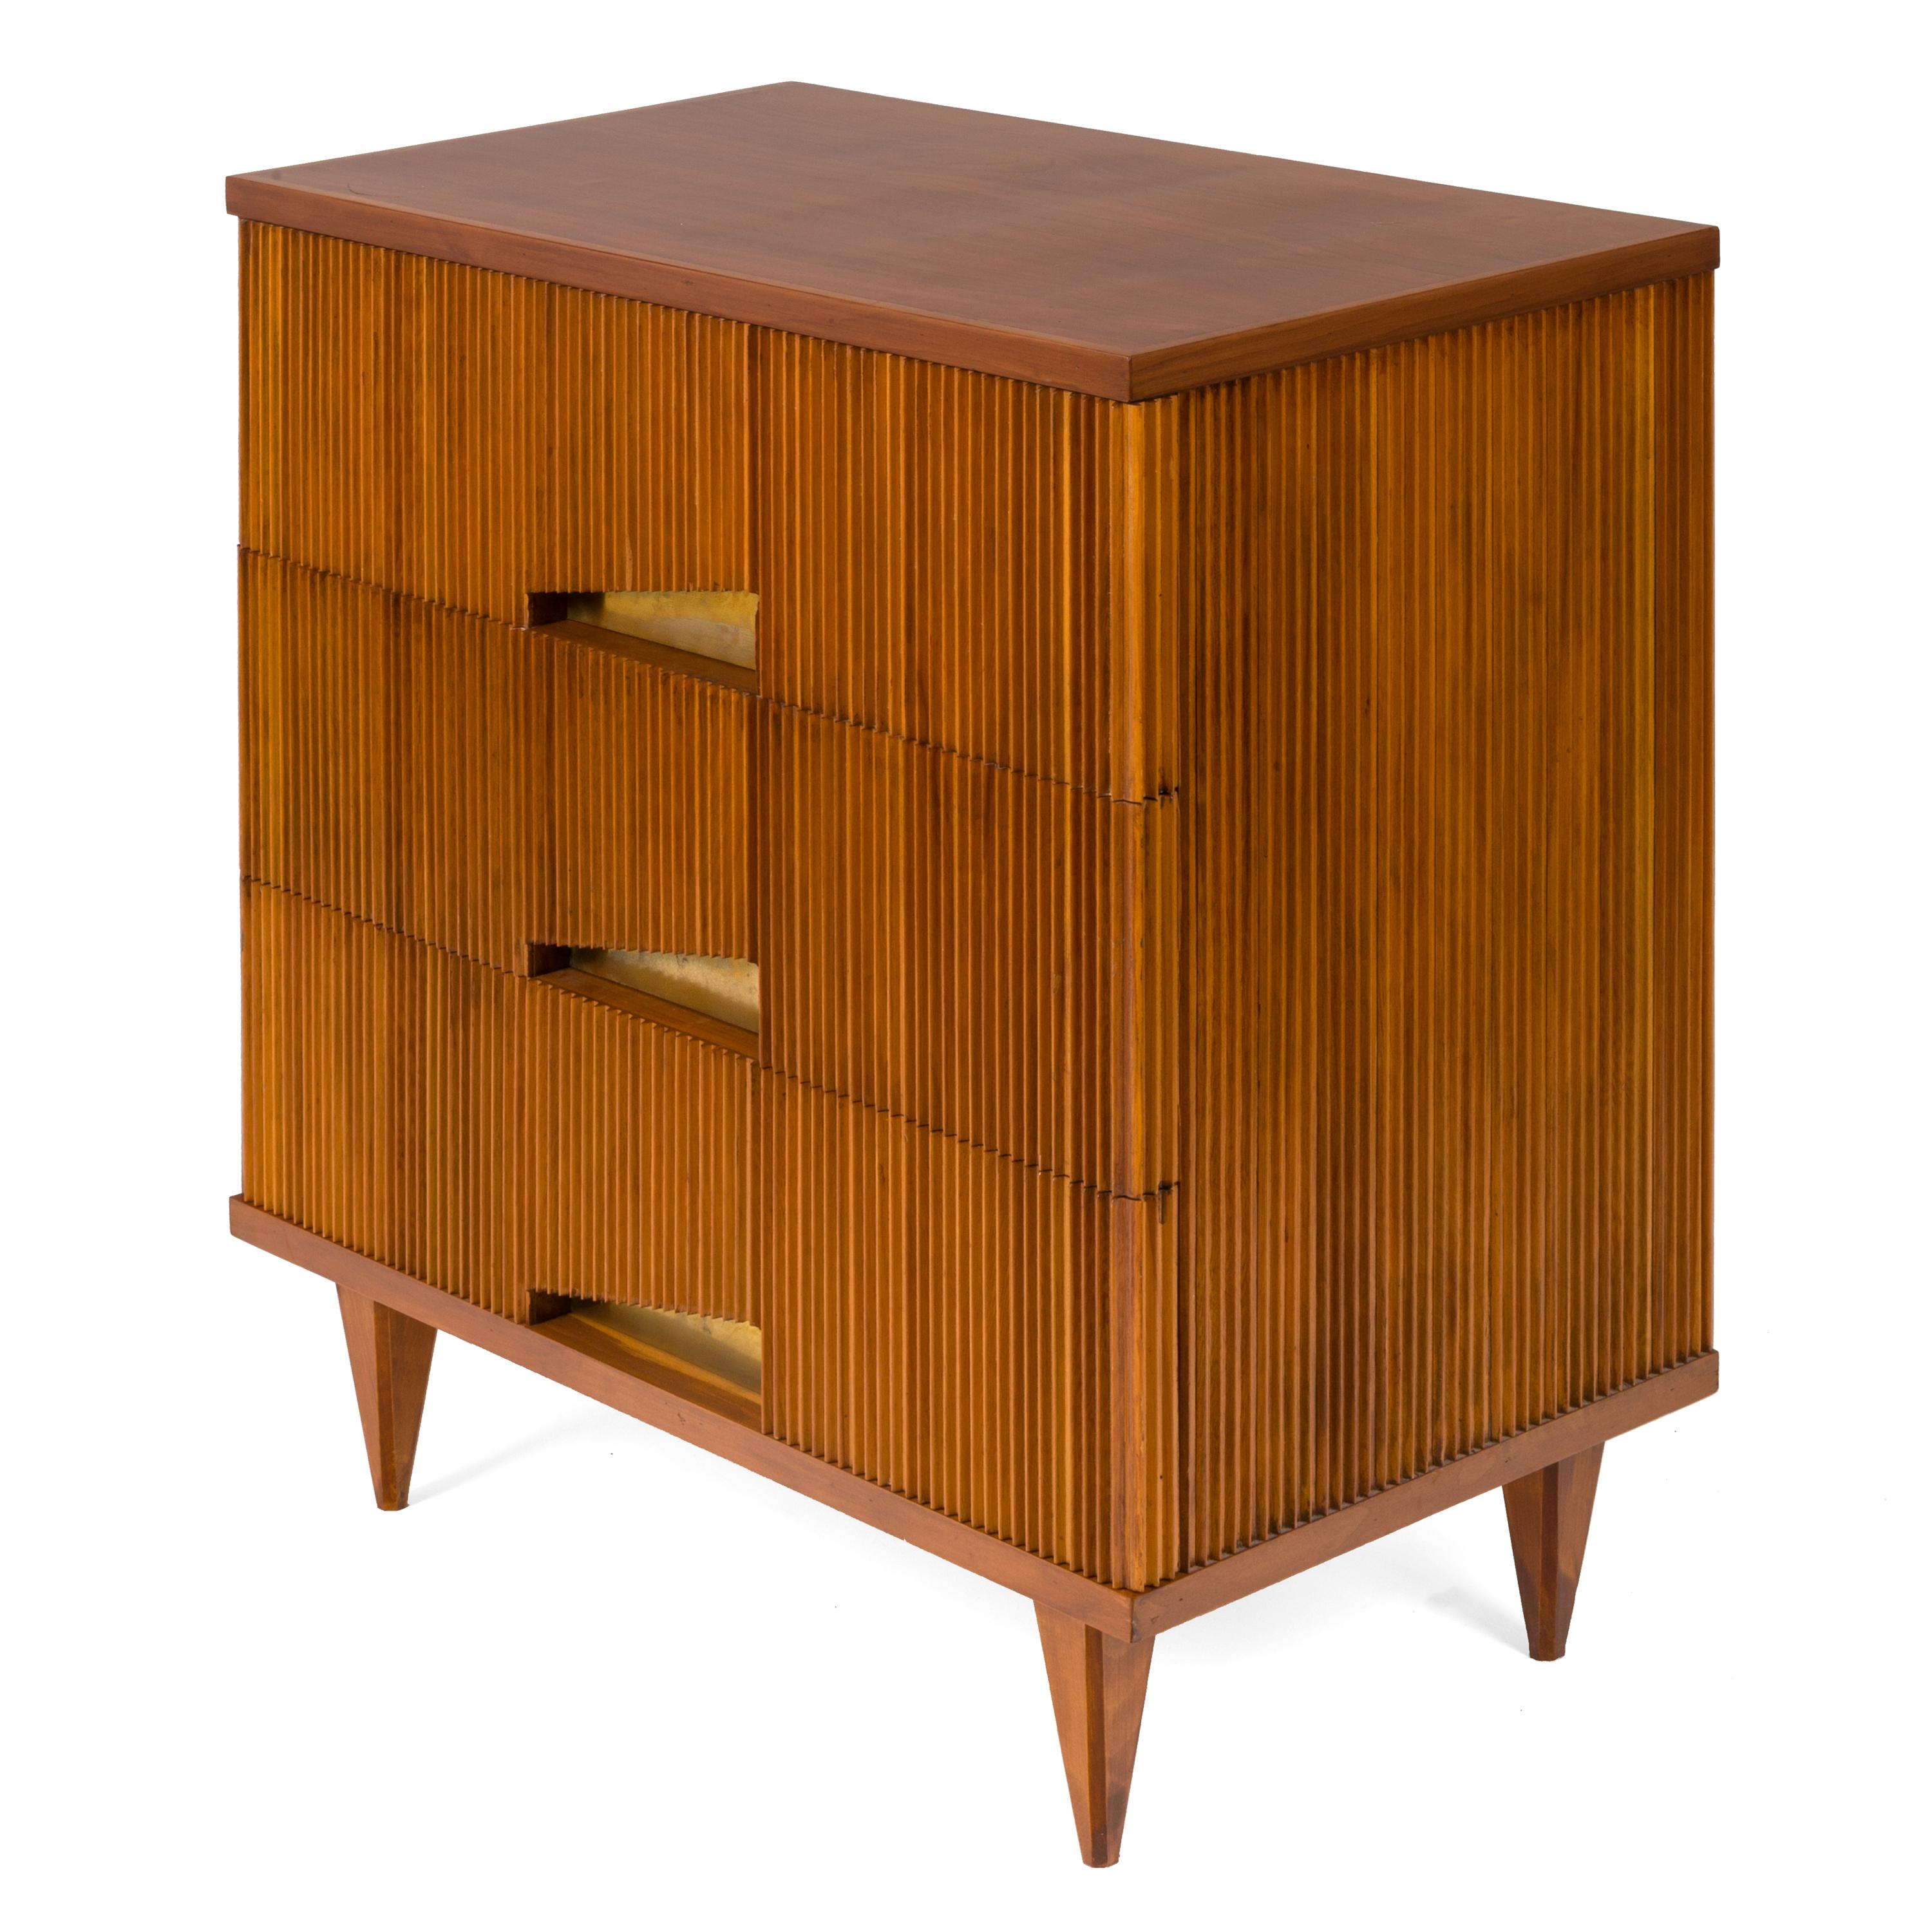 A very stylish chest with drawer pulls very reminiscent of the chest of drawers Gio Ponti designed in the 1950s.